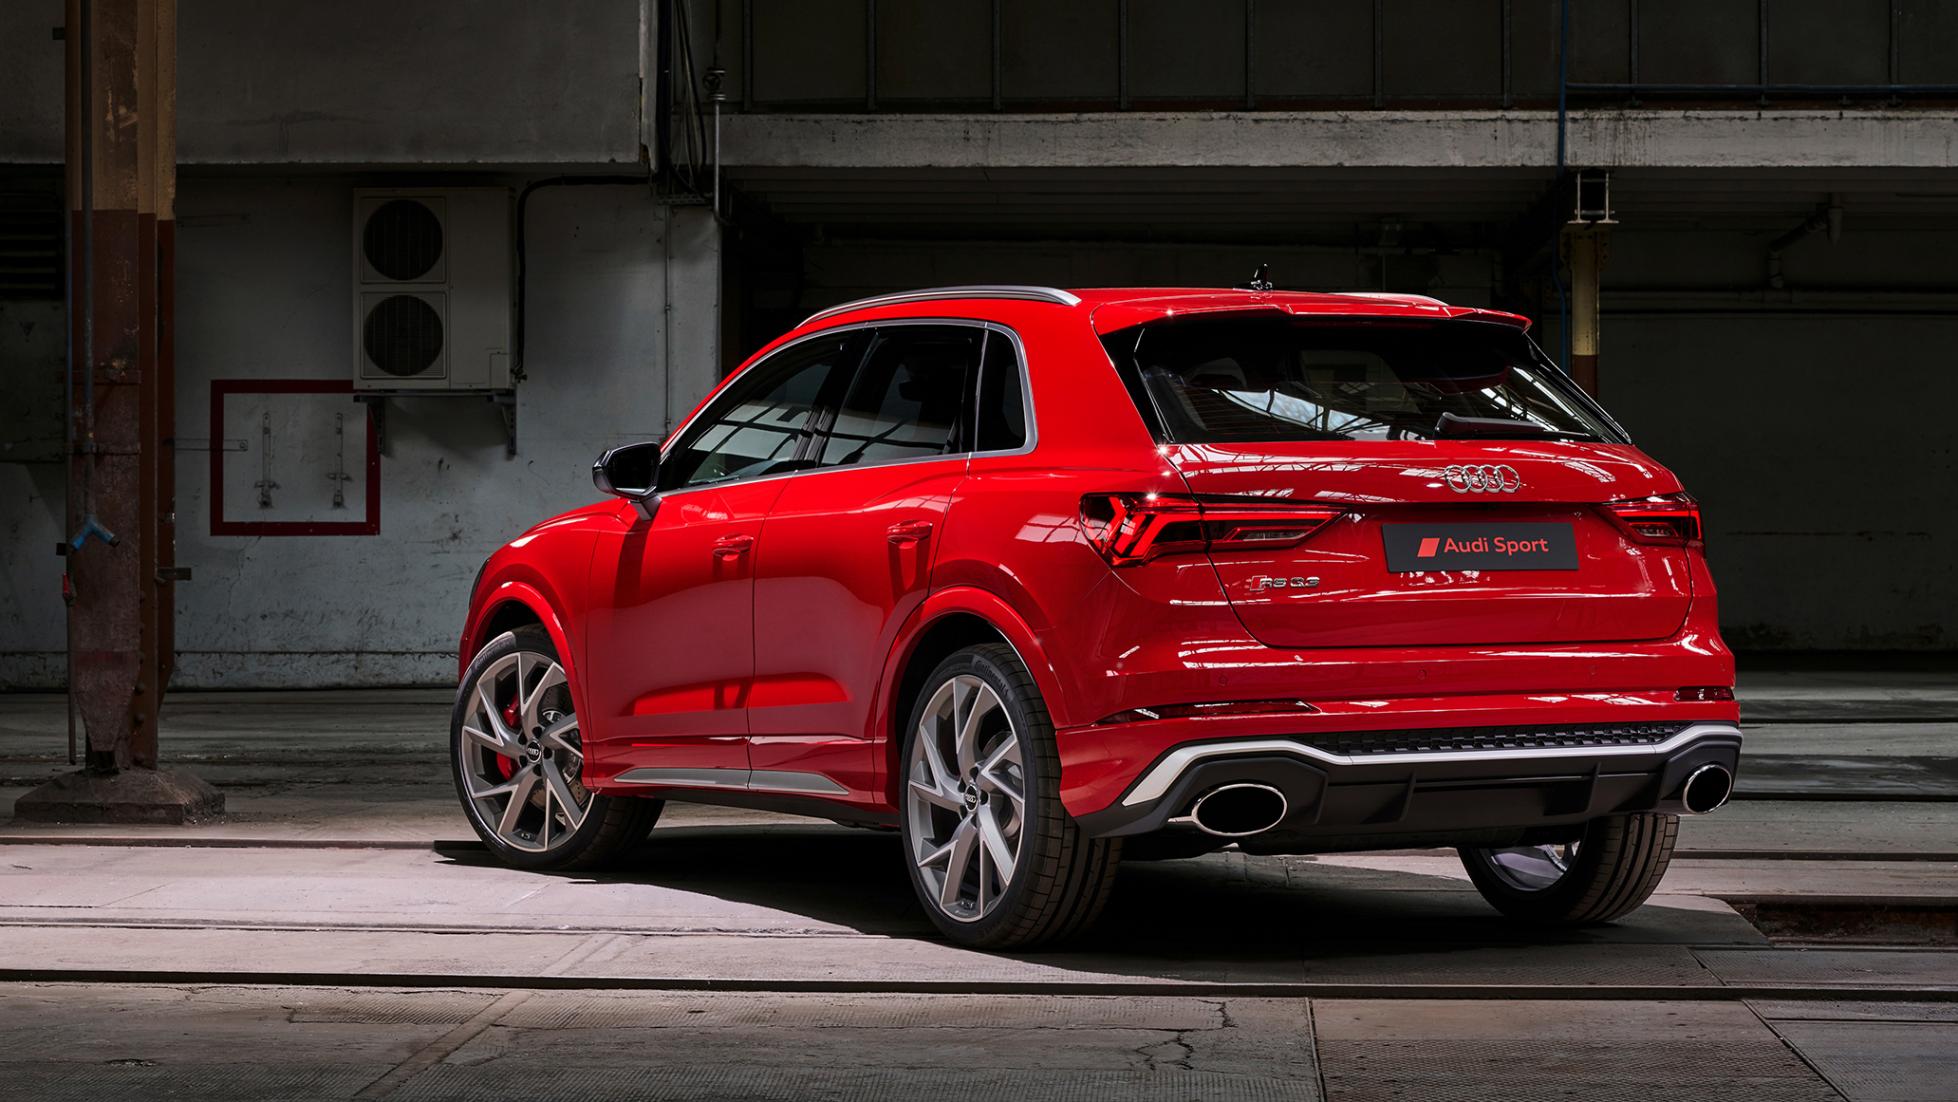 The Audi RSQ3 Sportback is a 400bhp grille with a mini-SUV attached